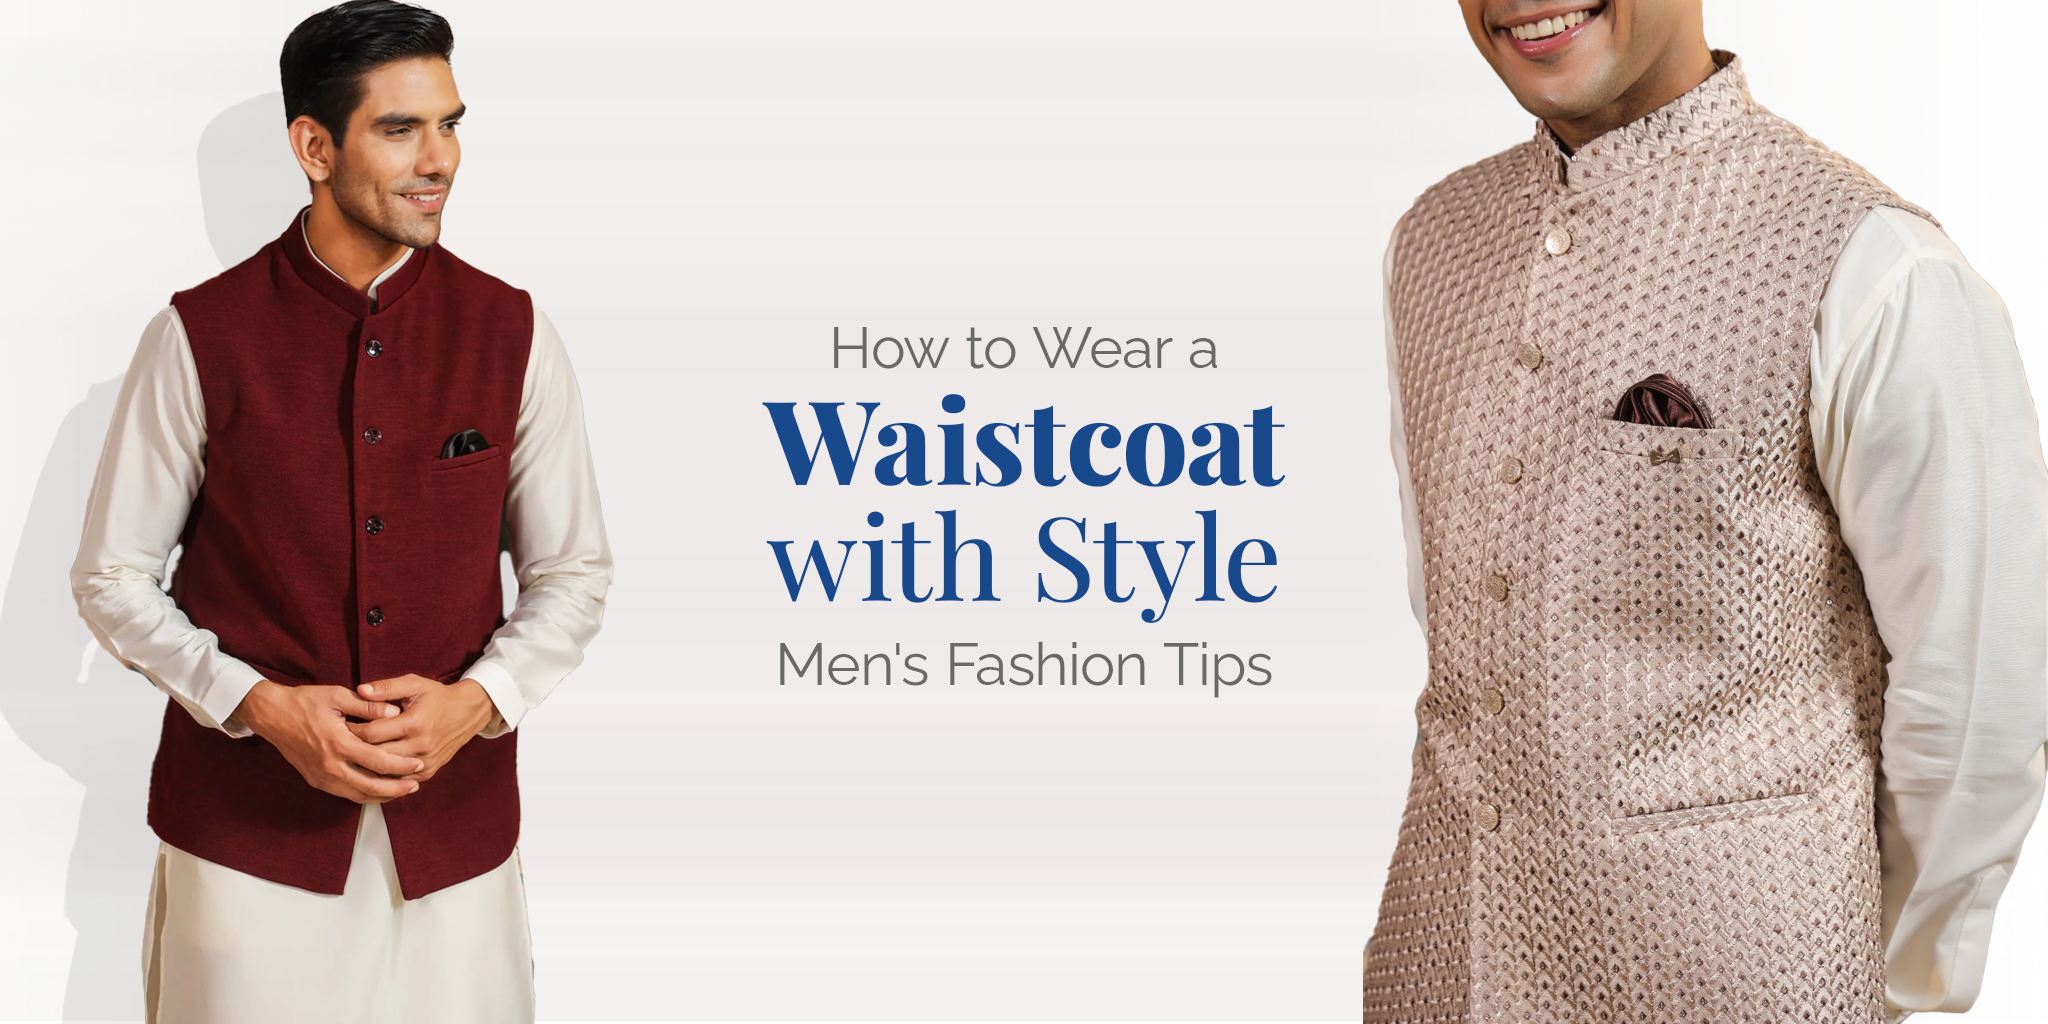 How to Wear a Waistcoat with Style: Men's Fashion Tips